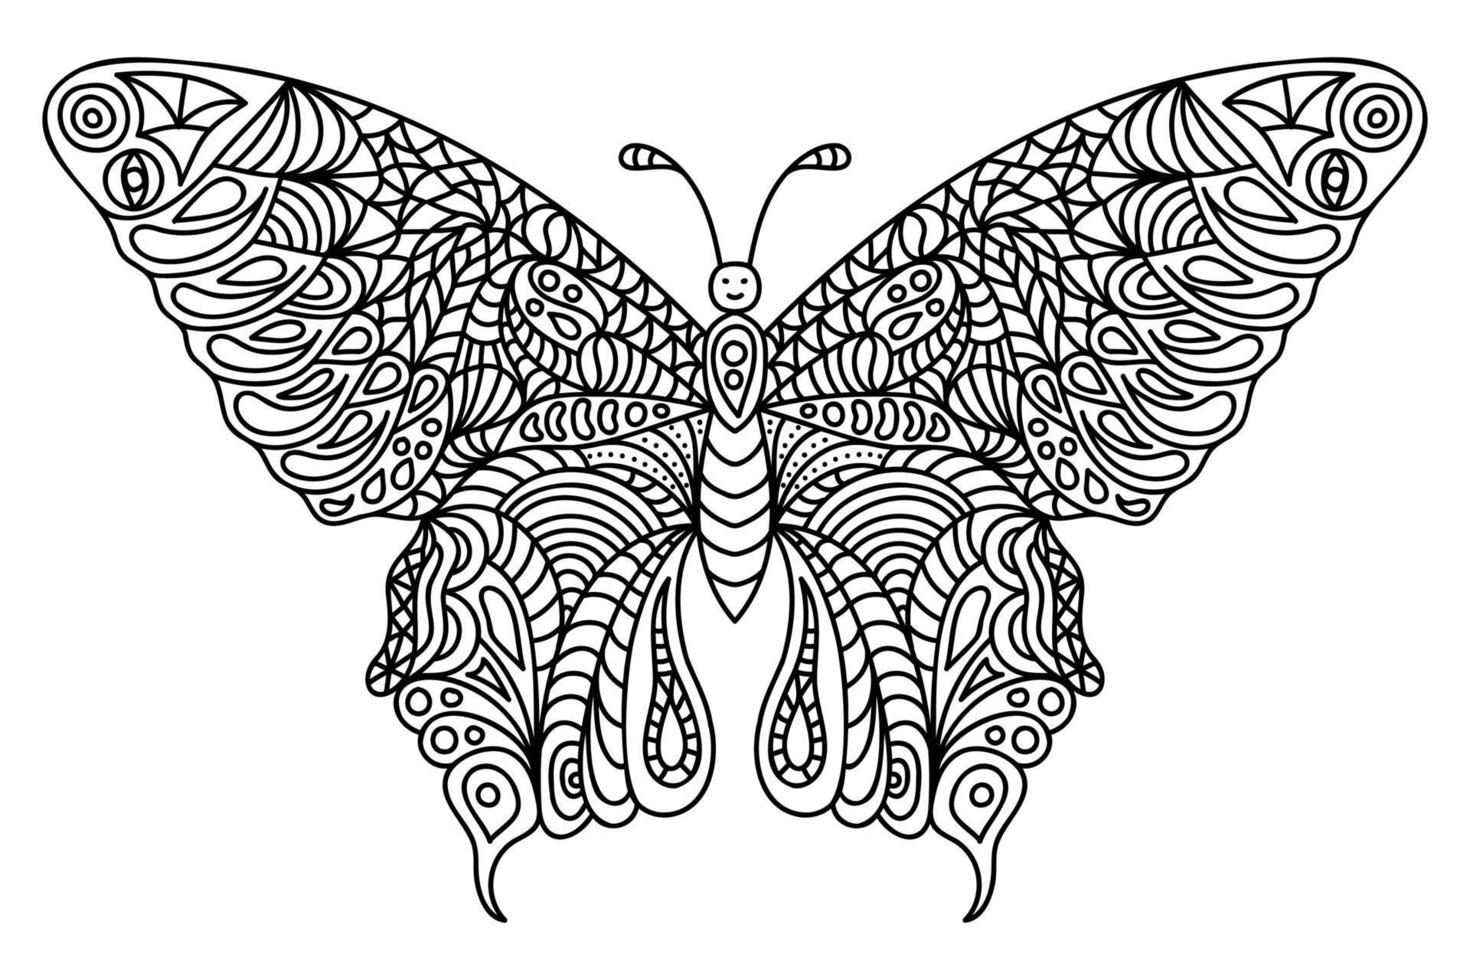 Antistress meditative butterfly coloring page. Hand drawn in doodle style, zentangle vector